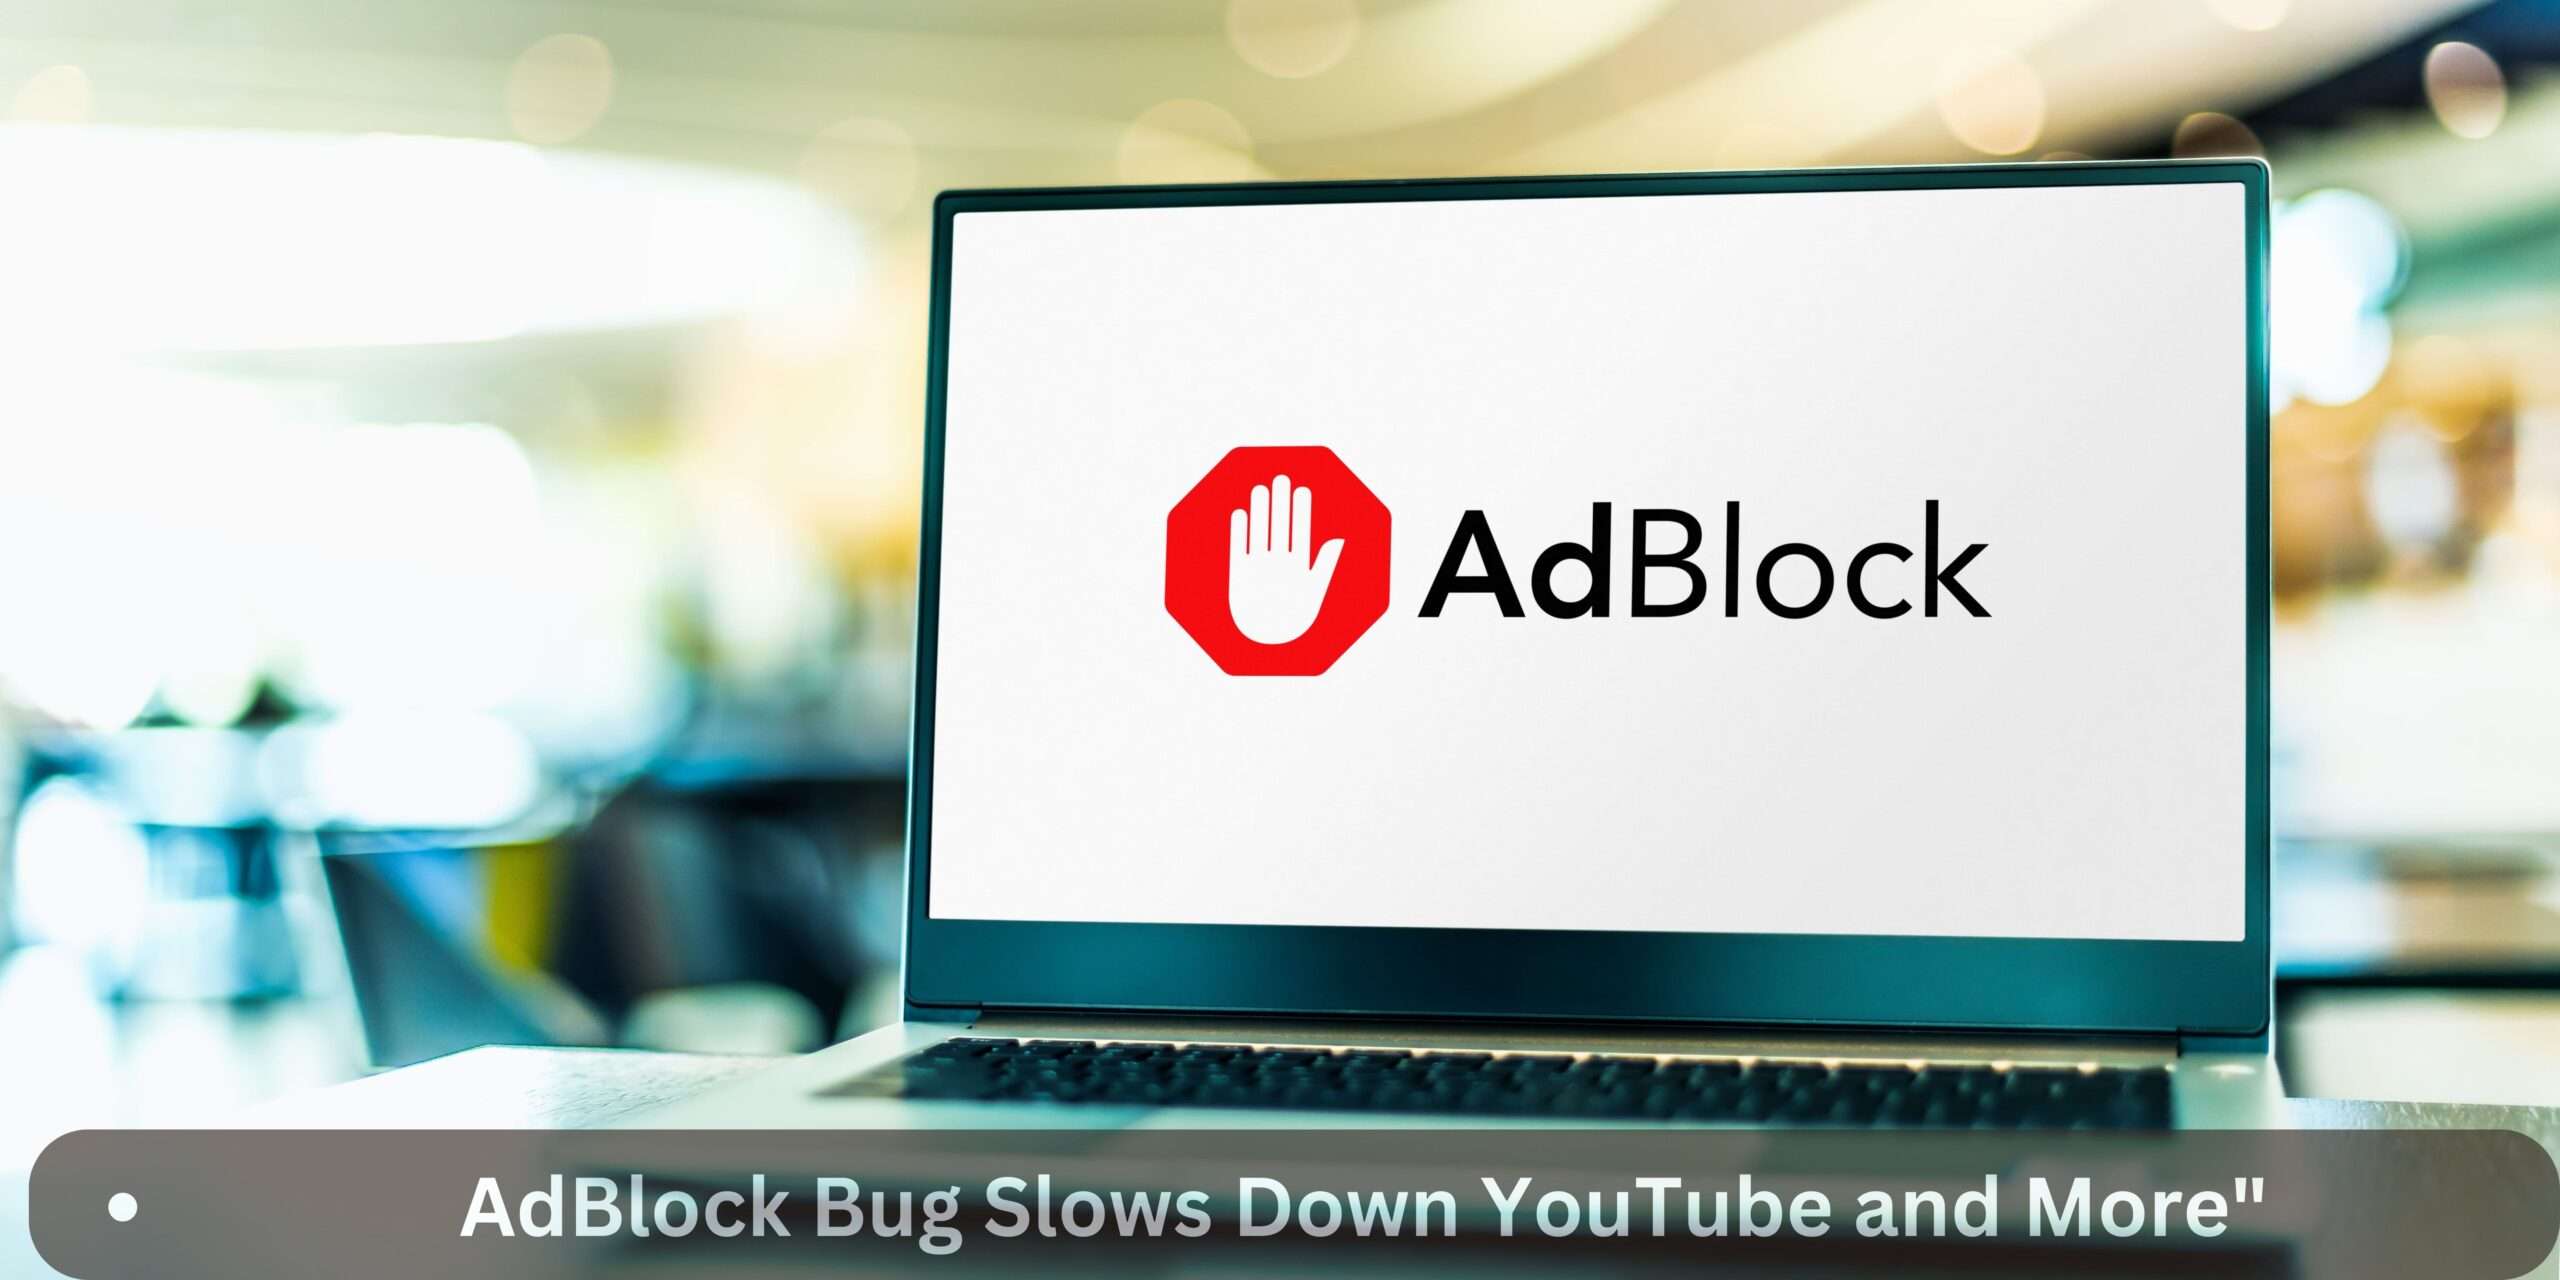 AdBlock Bug Slows Down YouTube and More"